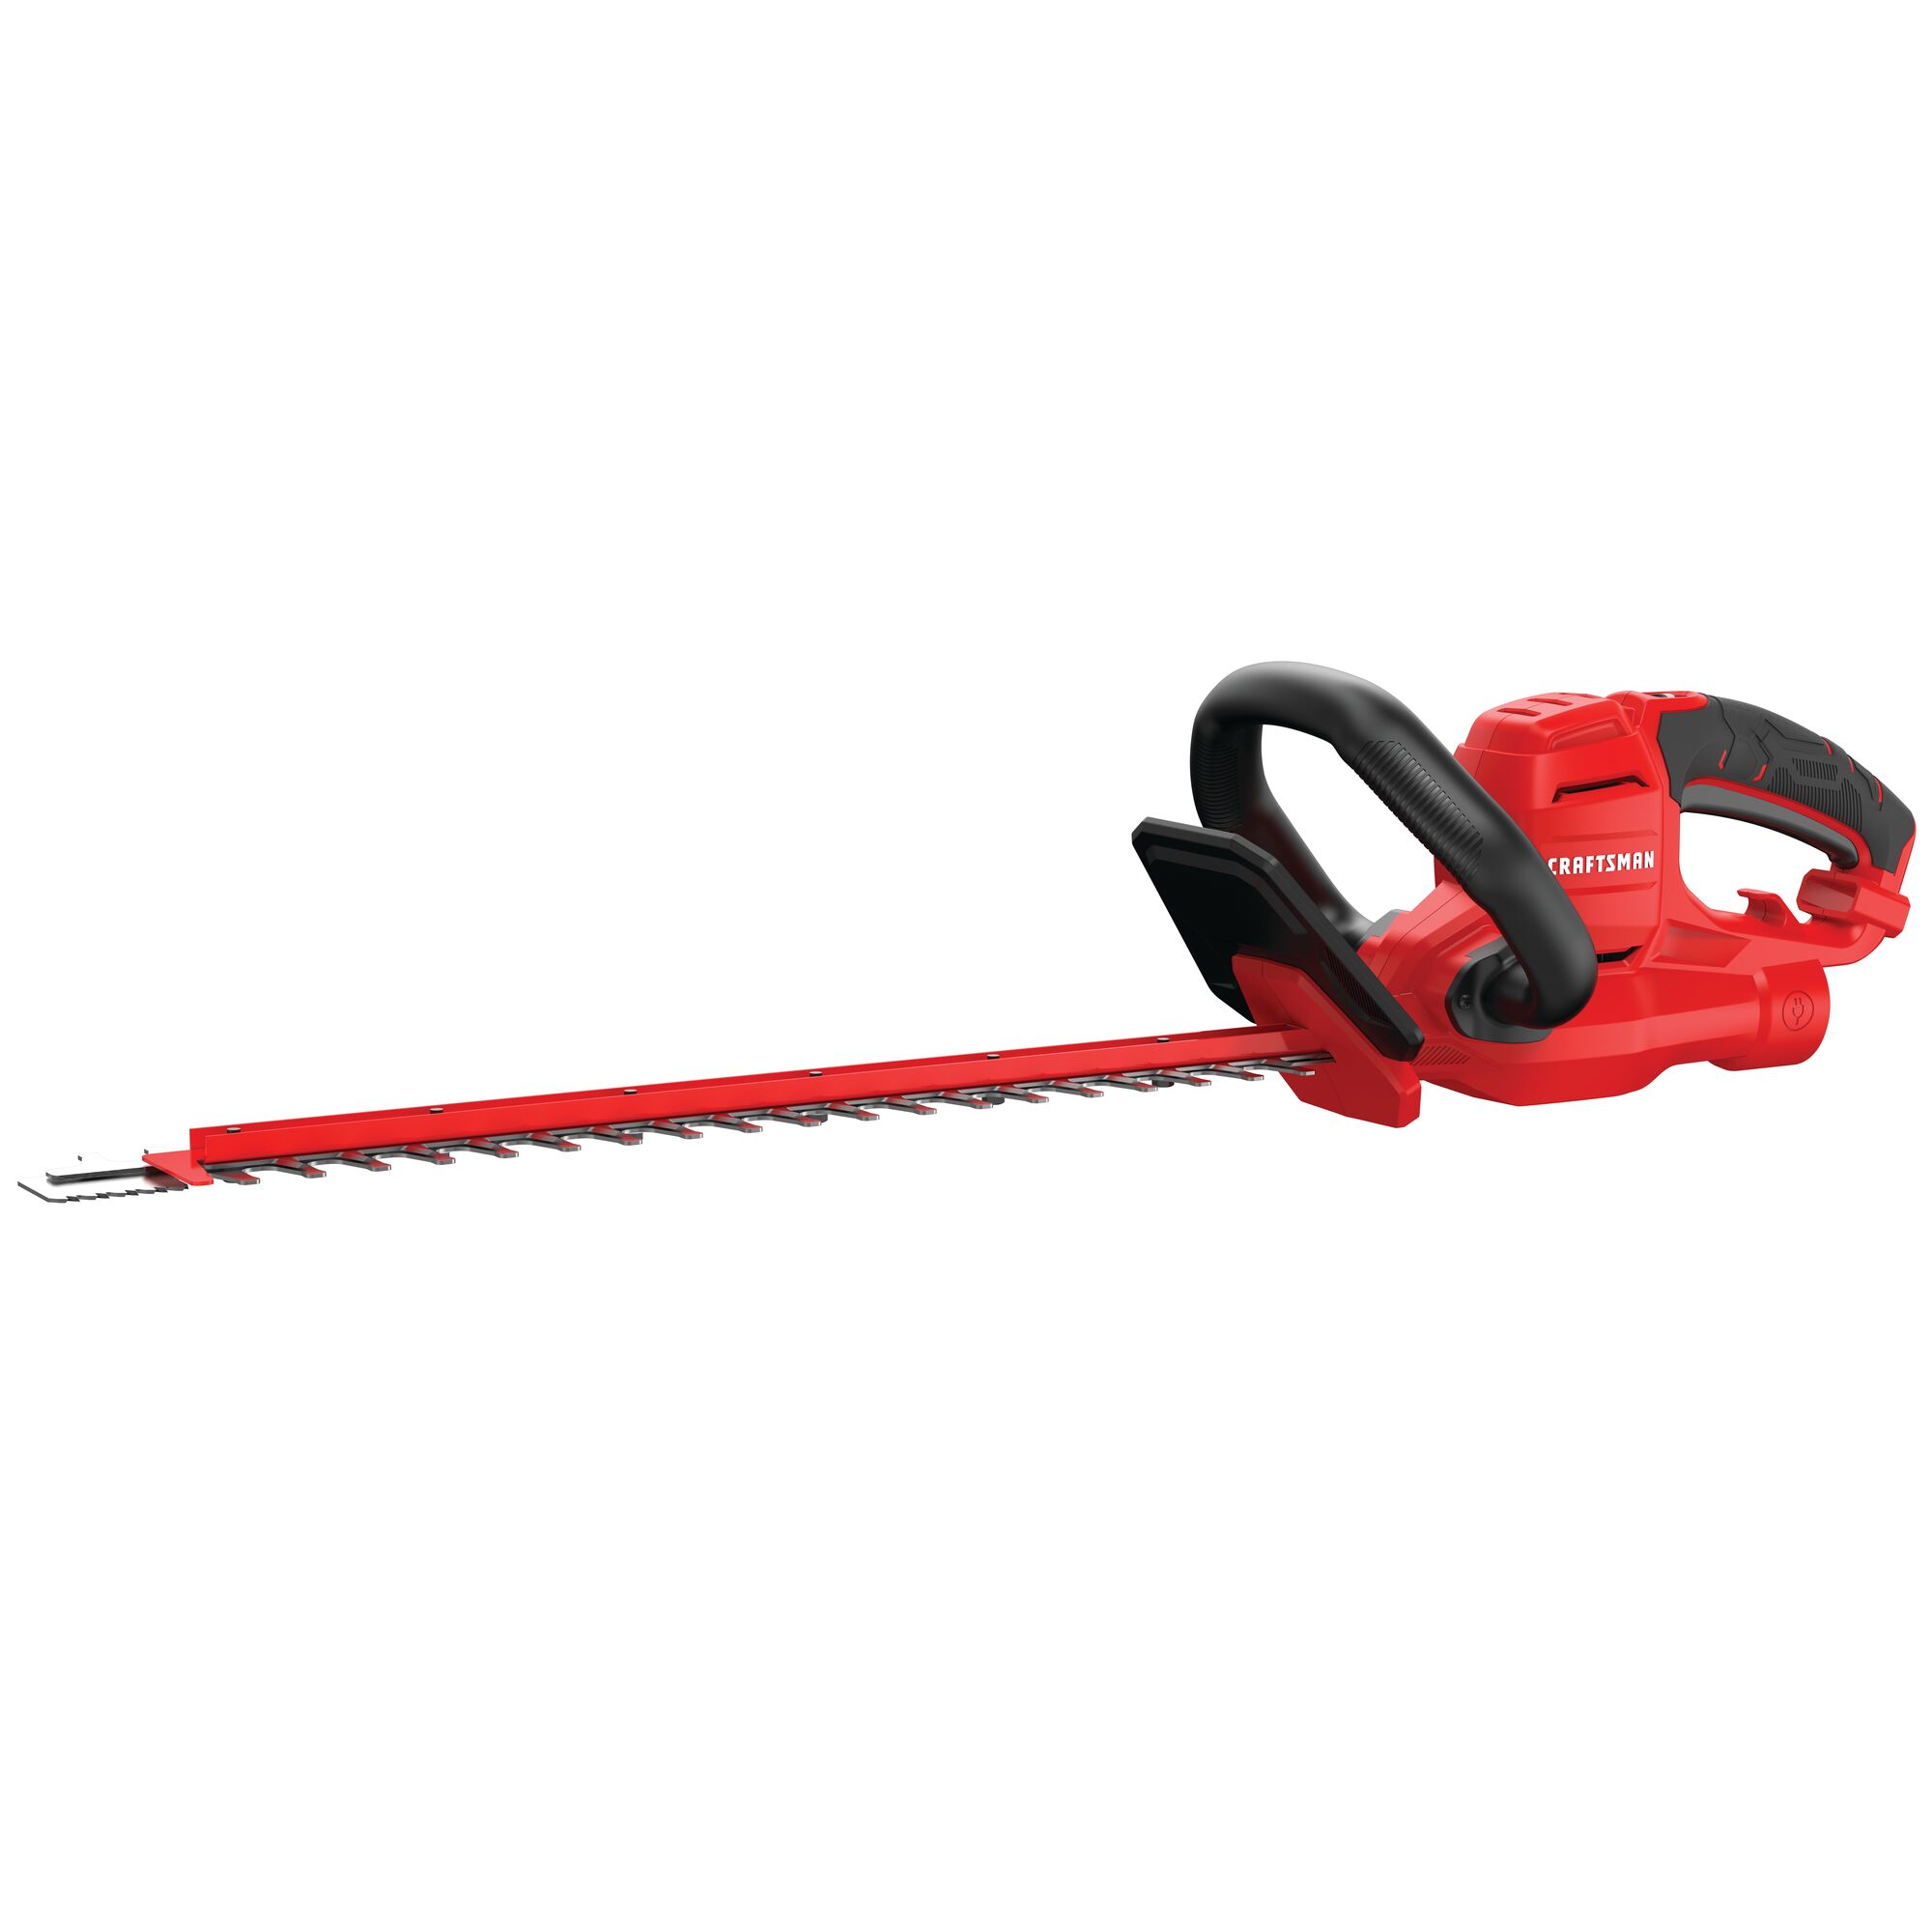 Profile of 3 dot 8 amp 22 inches corded hedge trimmer.